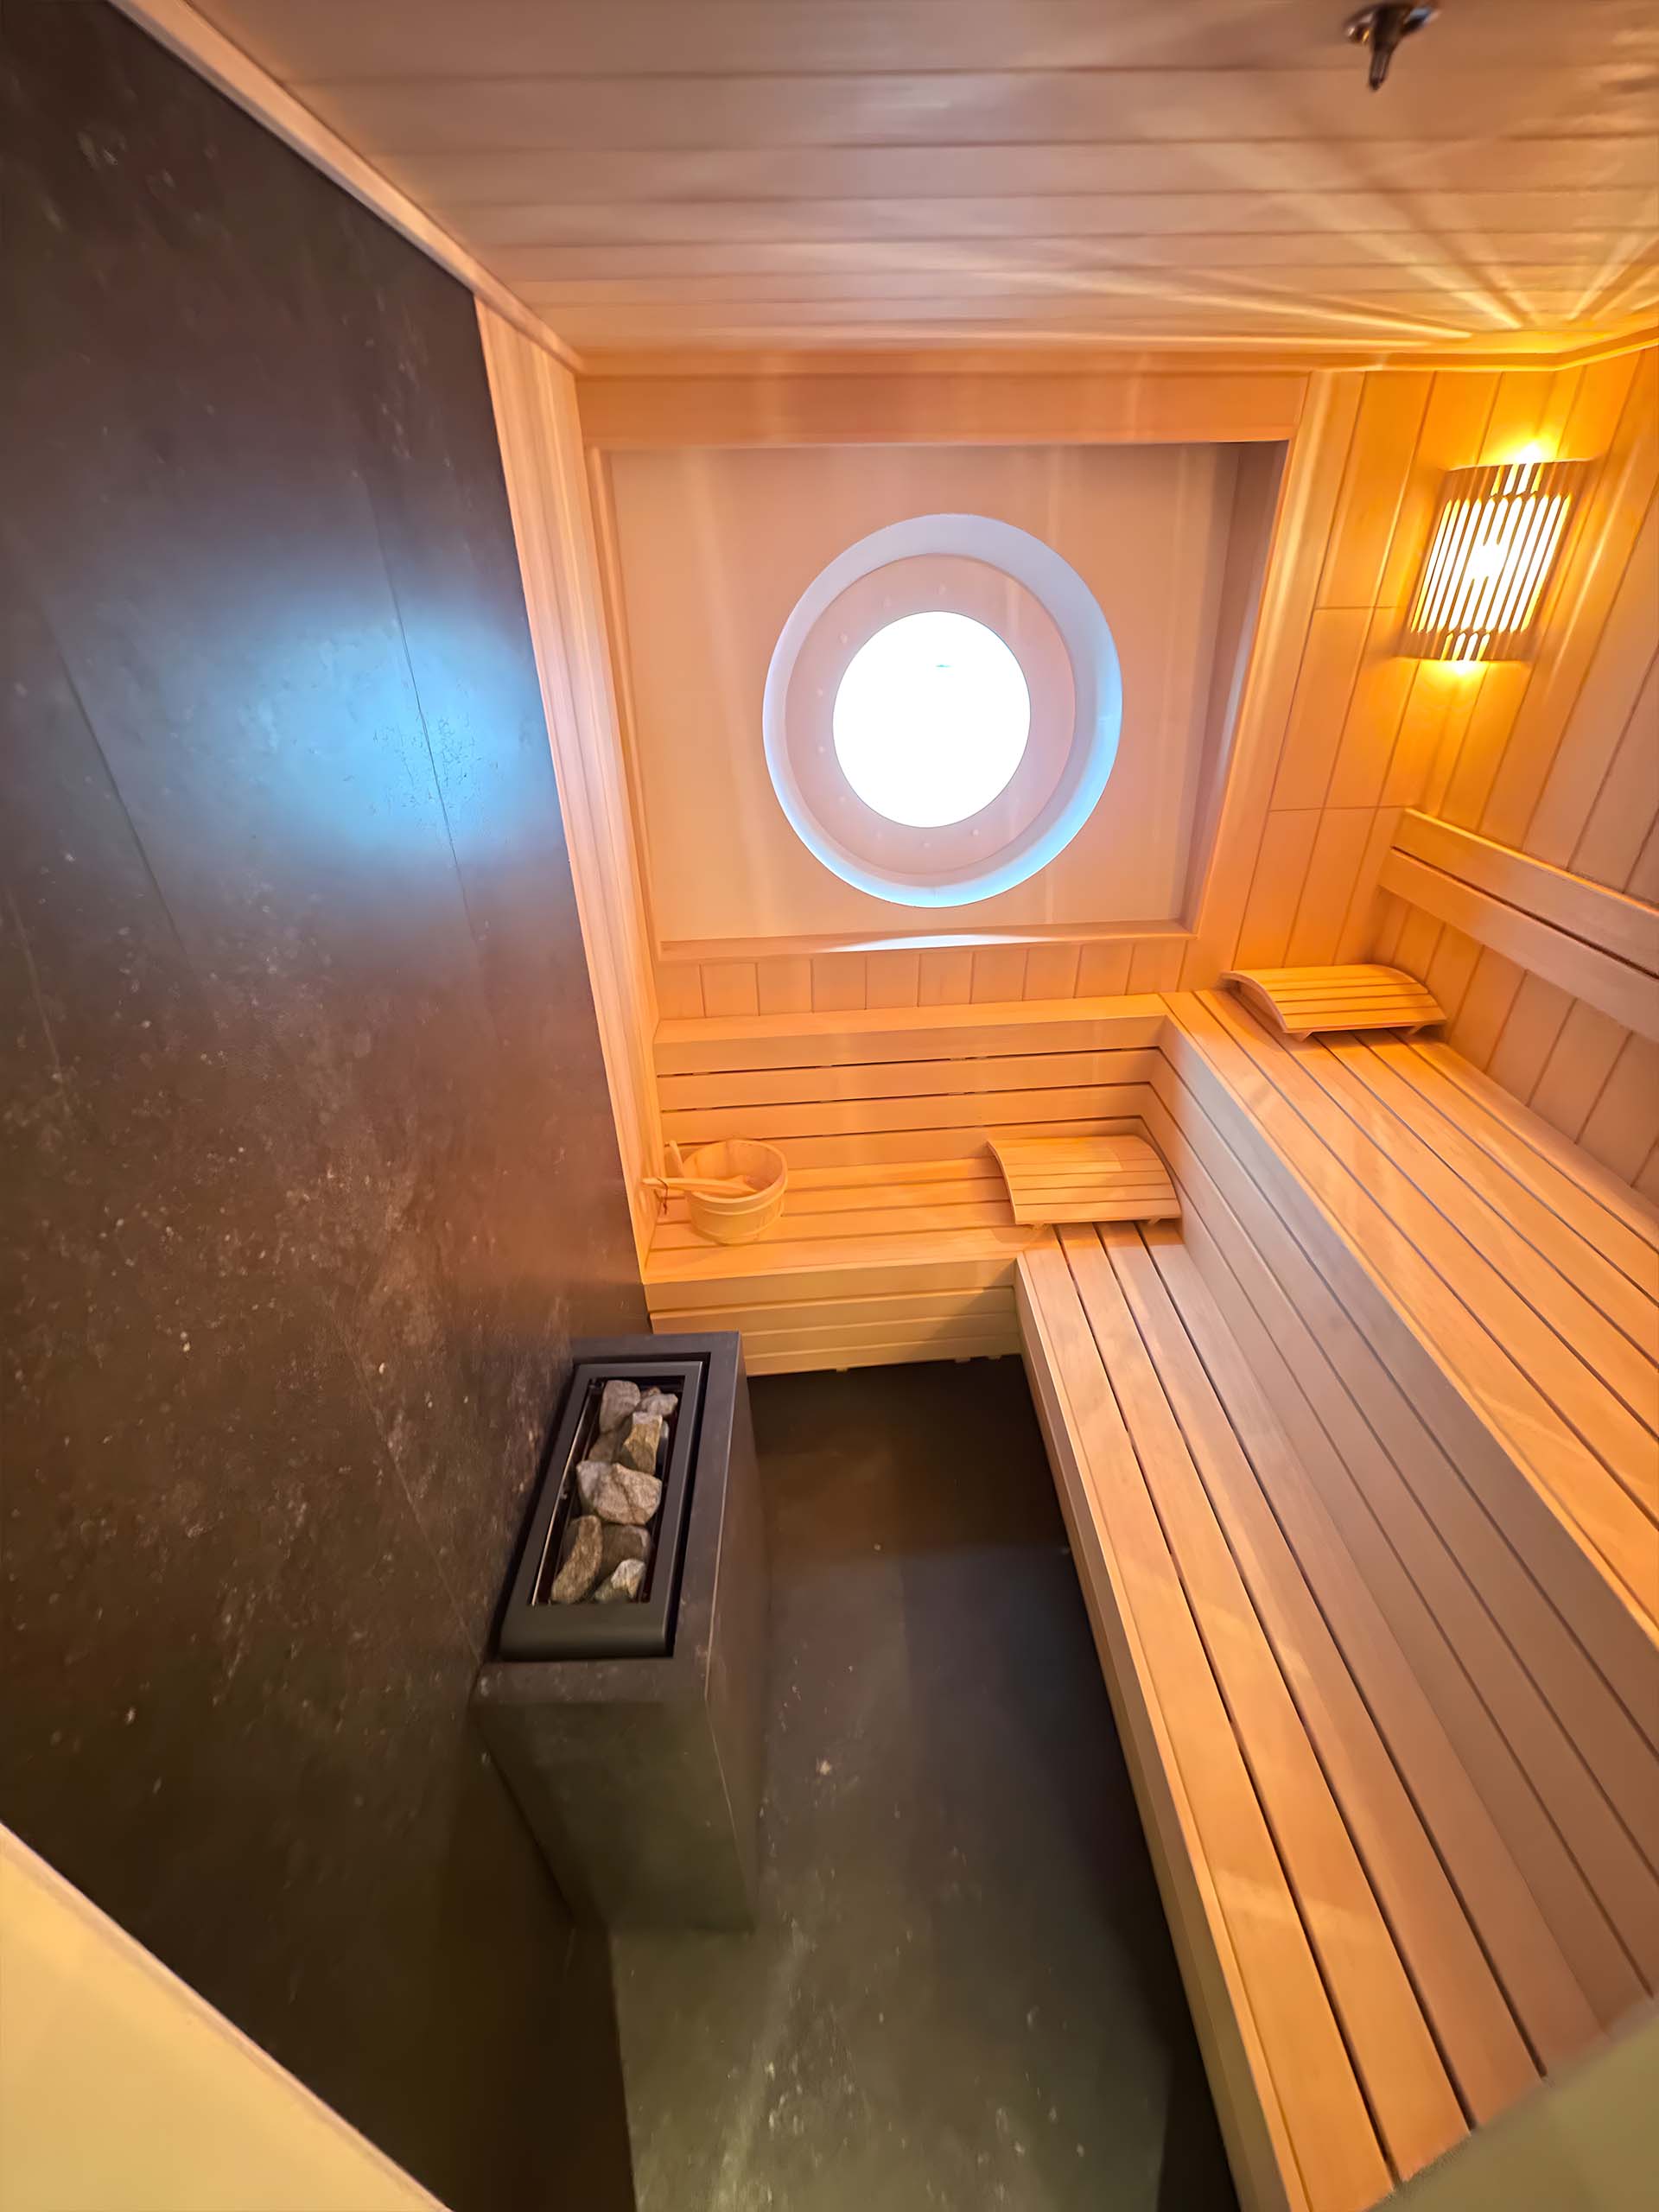 Amsterdam Boat Sauna – Navigate serenity. Purchase and build this Sauna Dekor marvel, fusing avant-garde design with an economical cost for an exceptional wellness retreat."